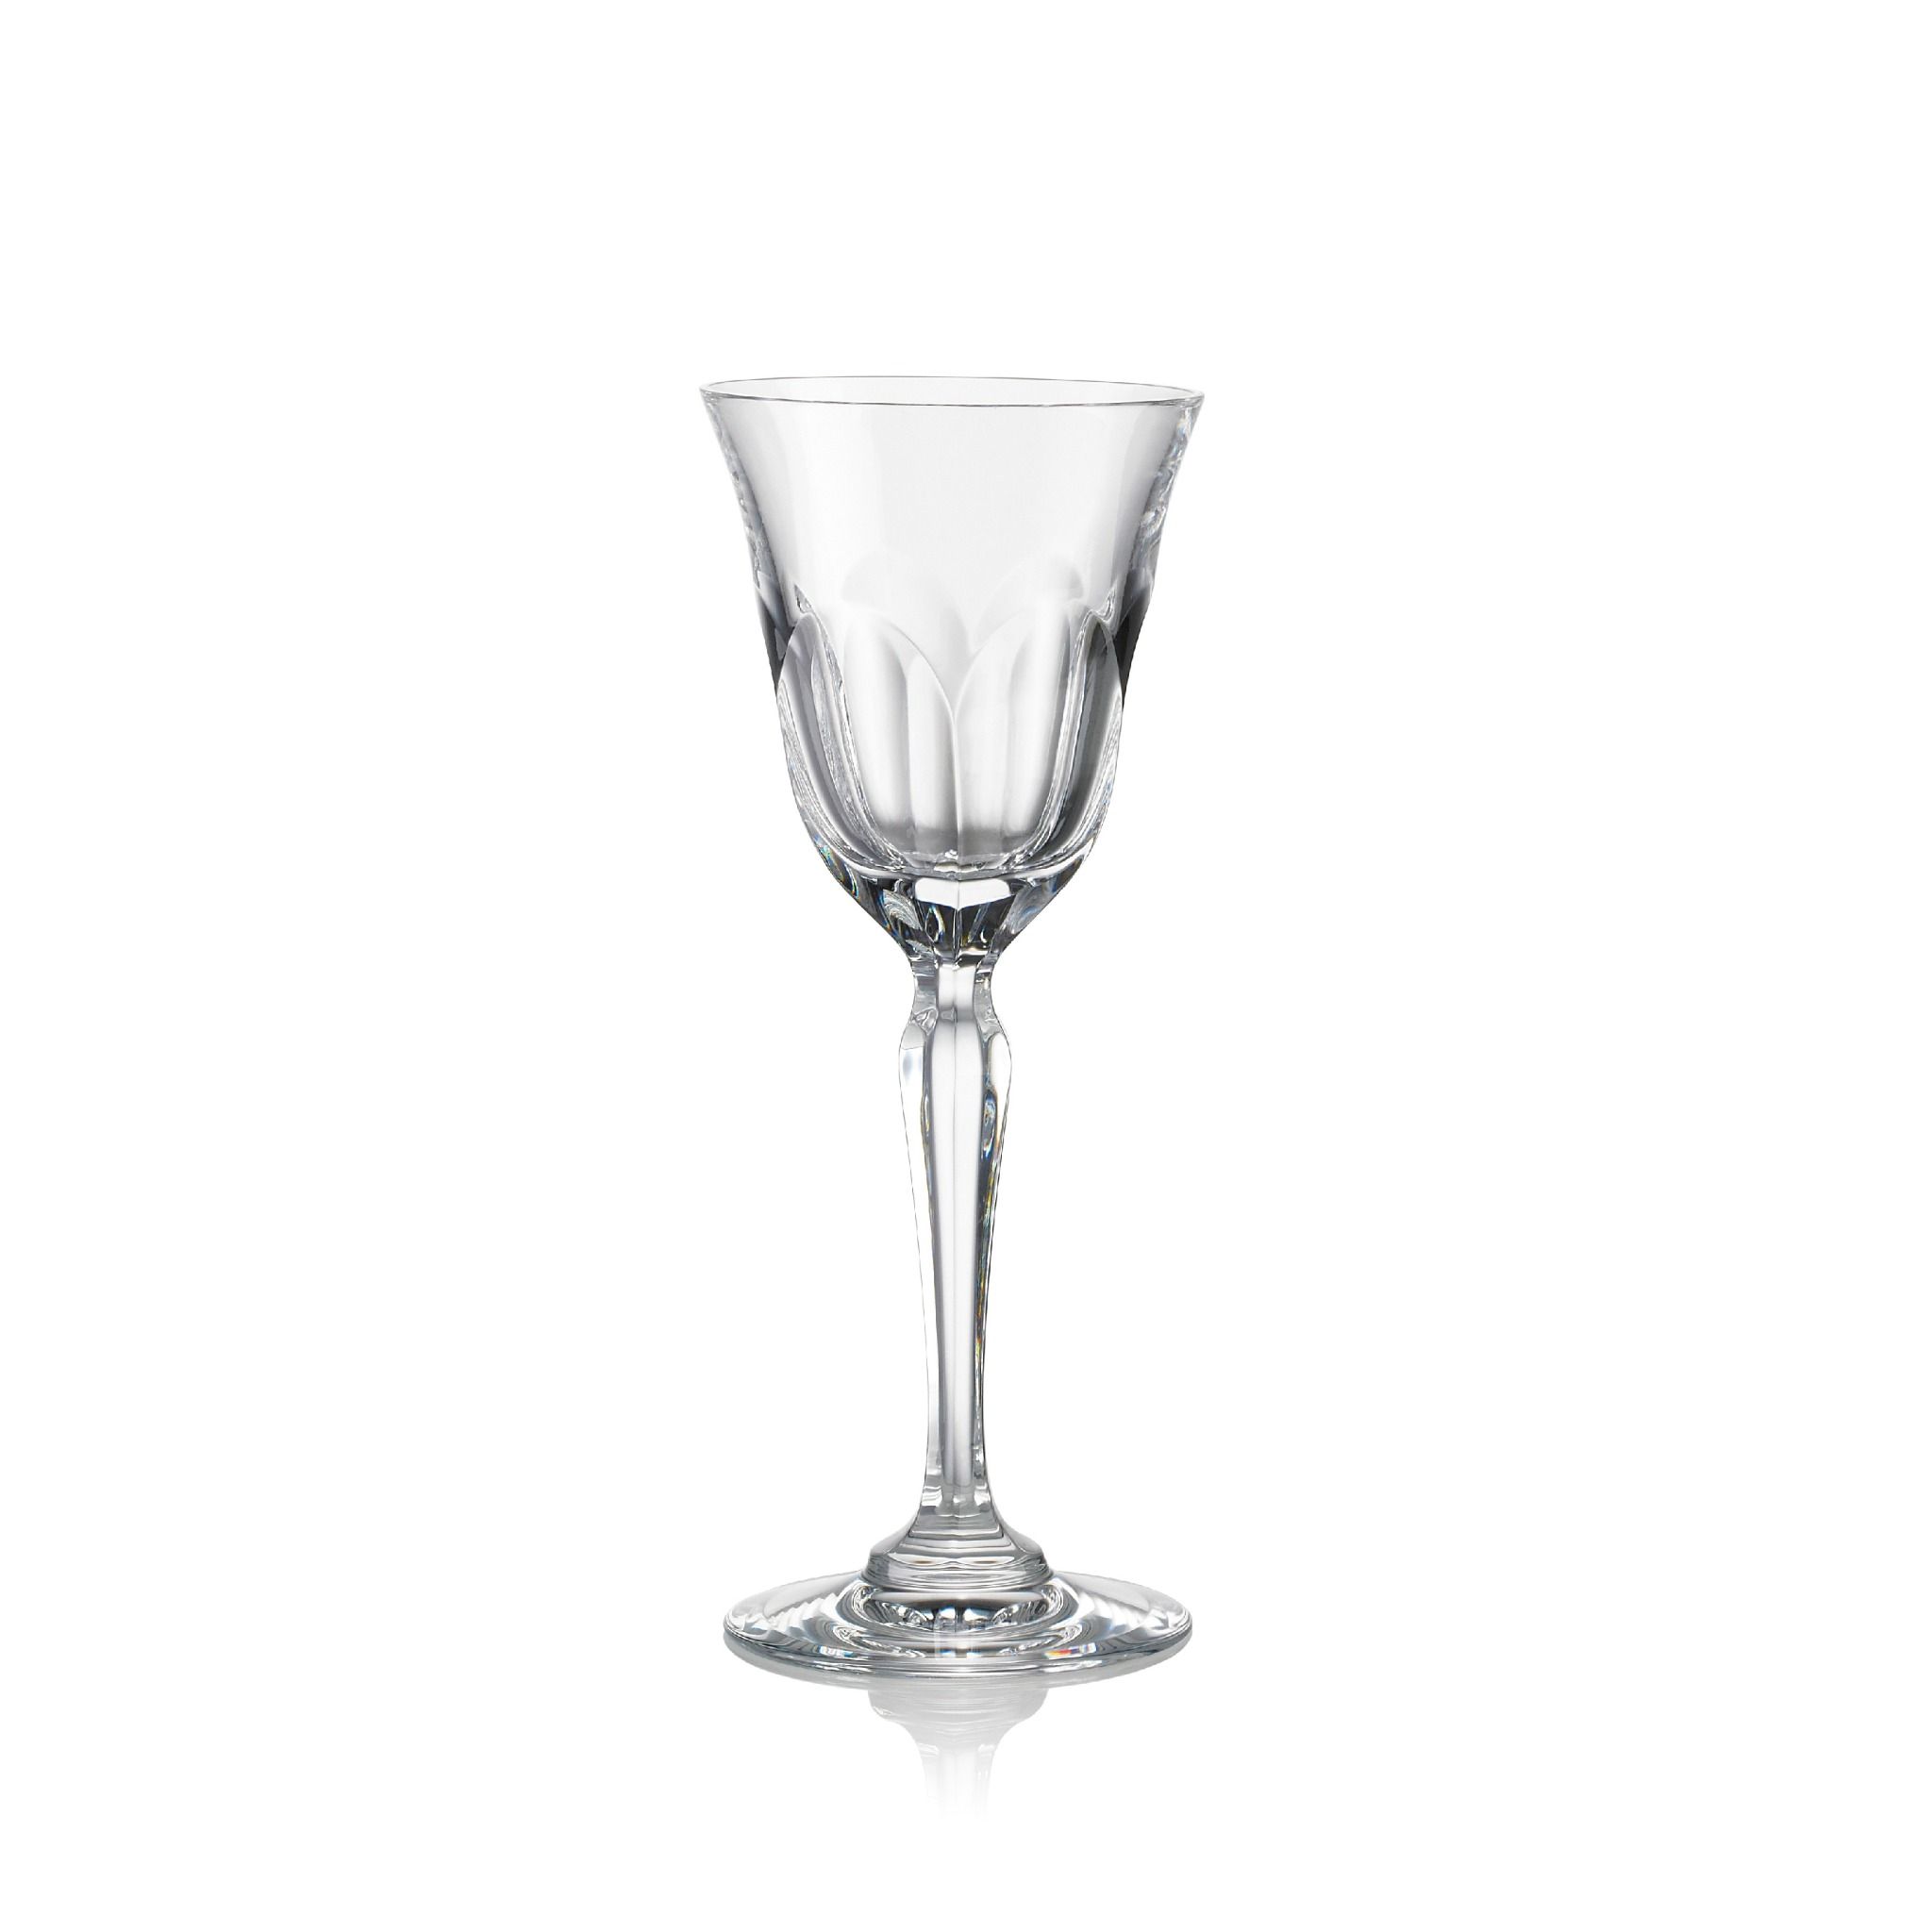  Ly vang goblet Aulide 